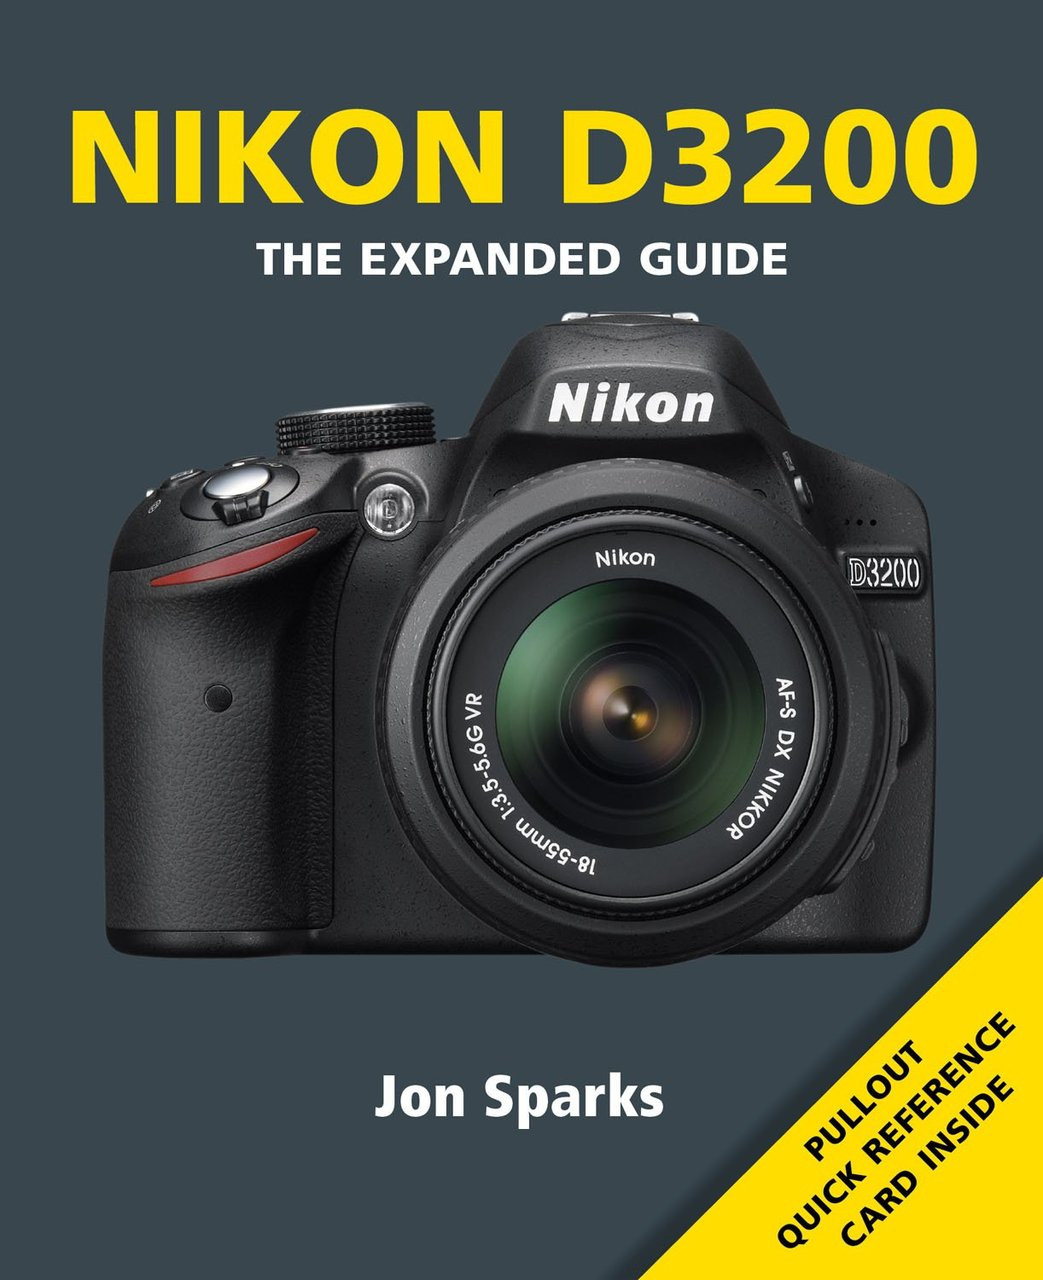 Nikon D5300 The Expanded Guide by Jon Sparks at Acephoto.net